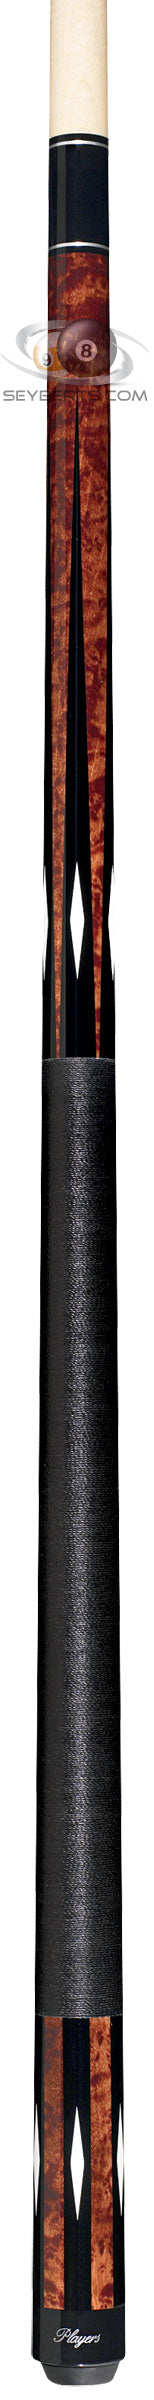 Players G3350 Pool Cue